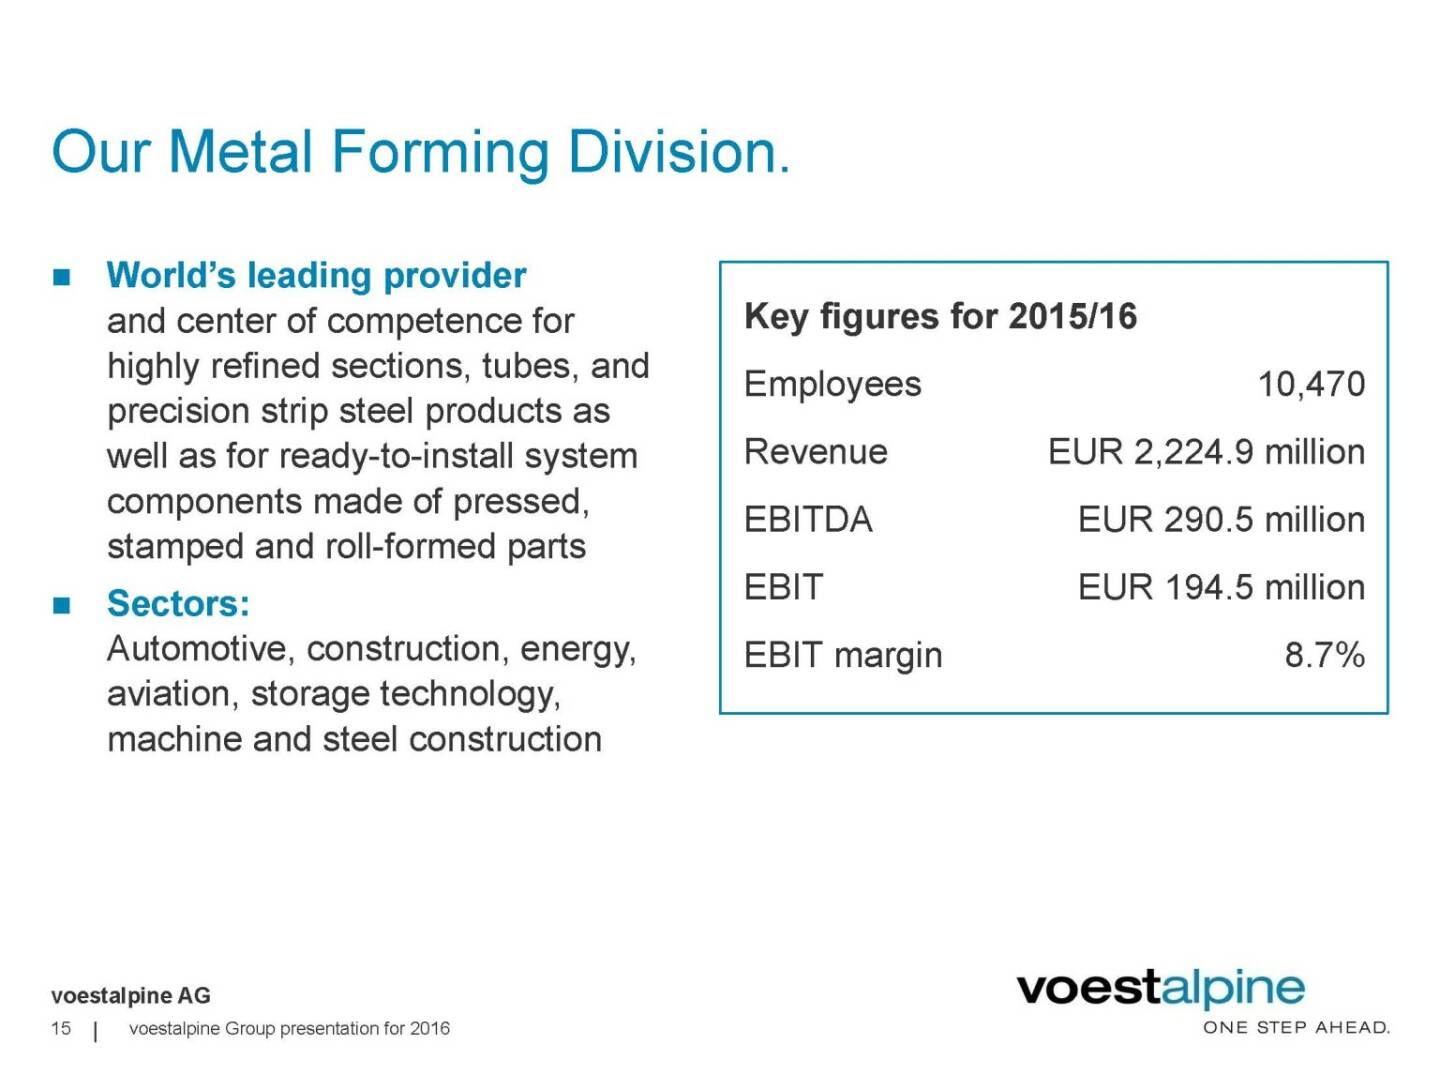 voestalpine - Our Metal Forming Division